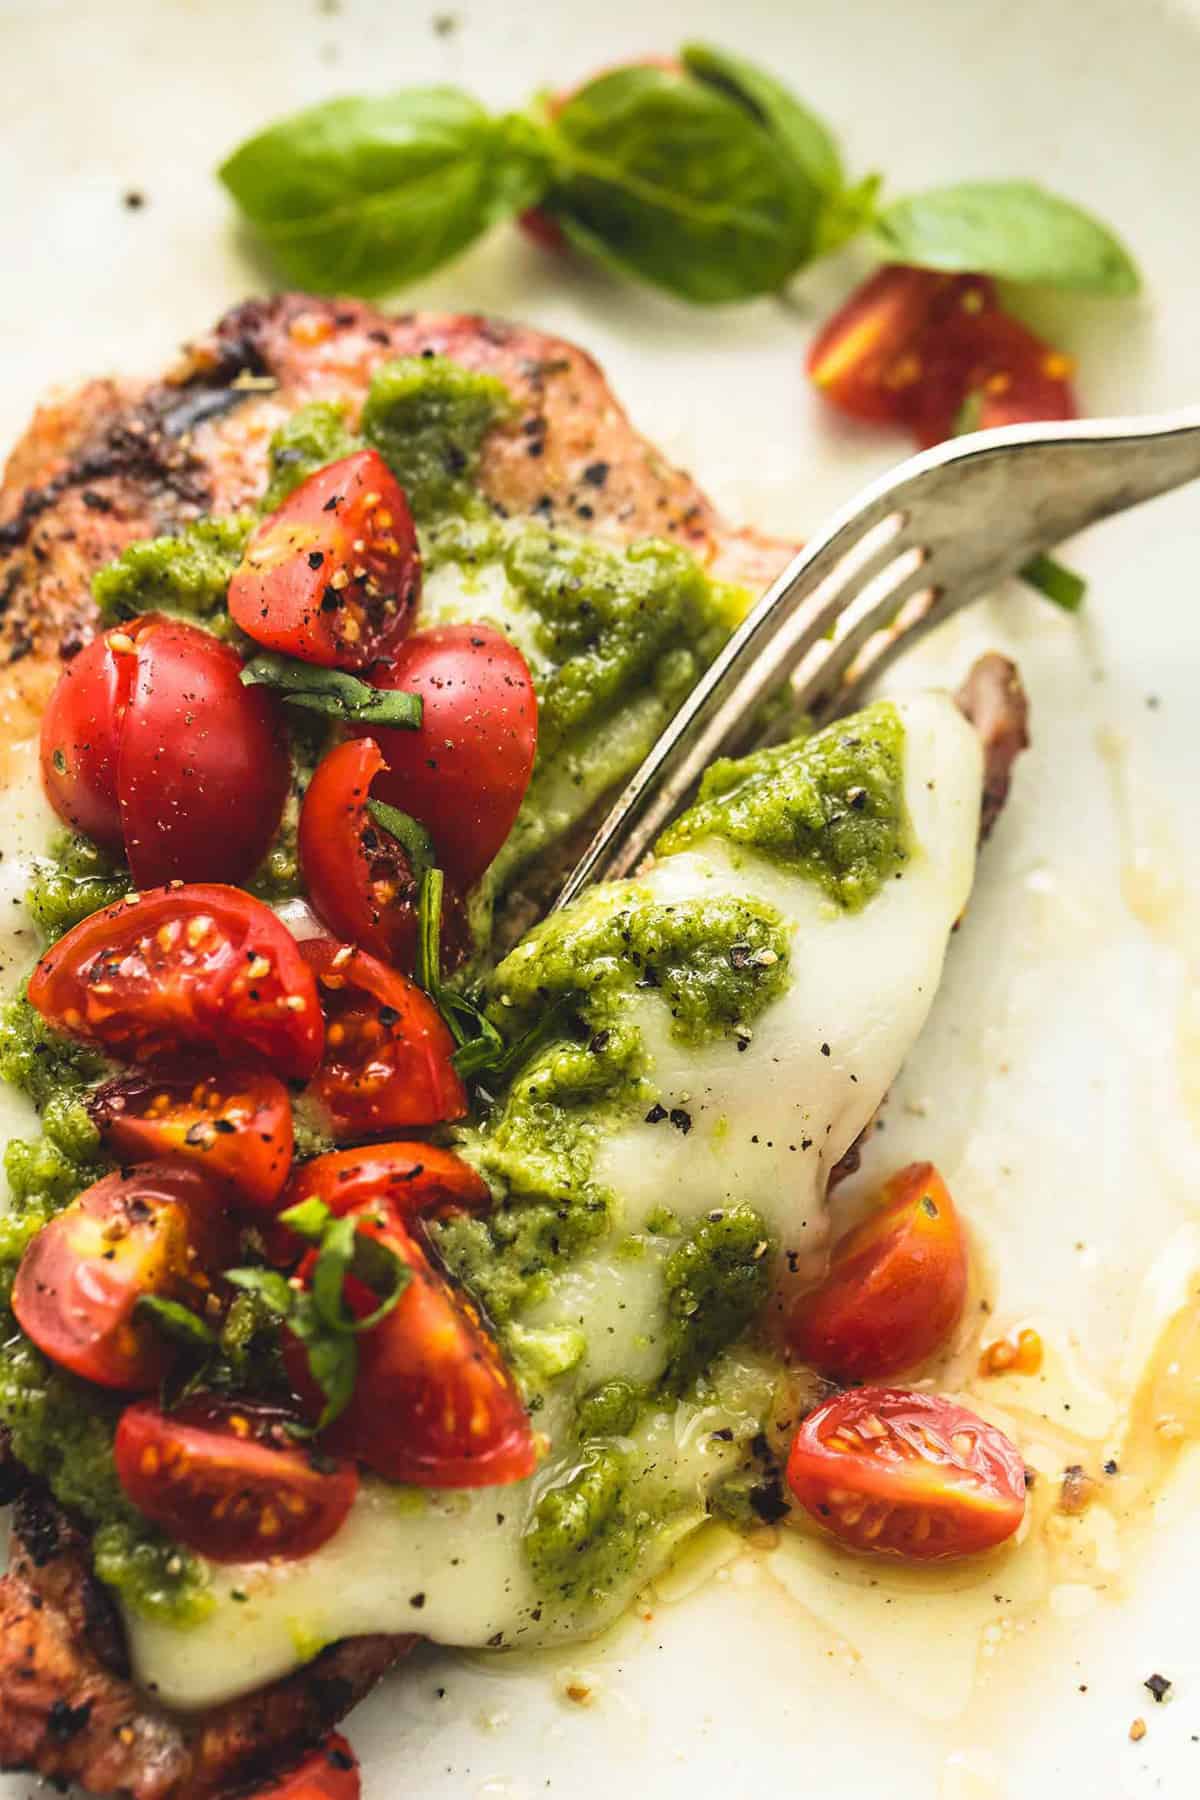 up close view of fork cutting into cooked chicken with cheese, pesto, and tomatoes